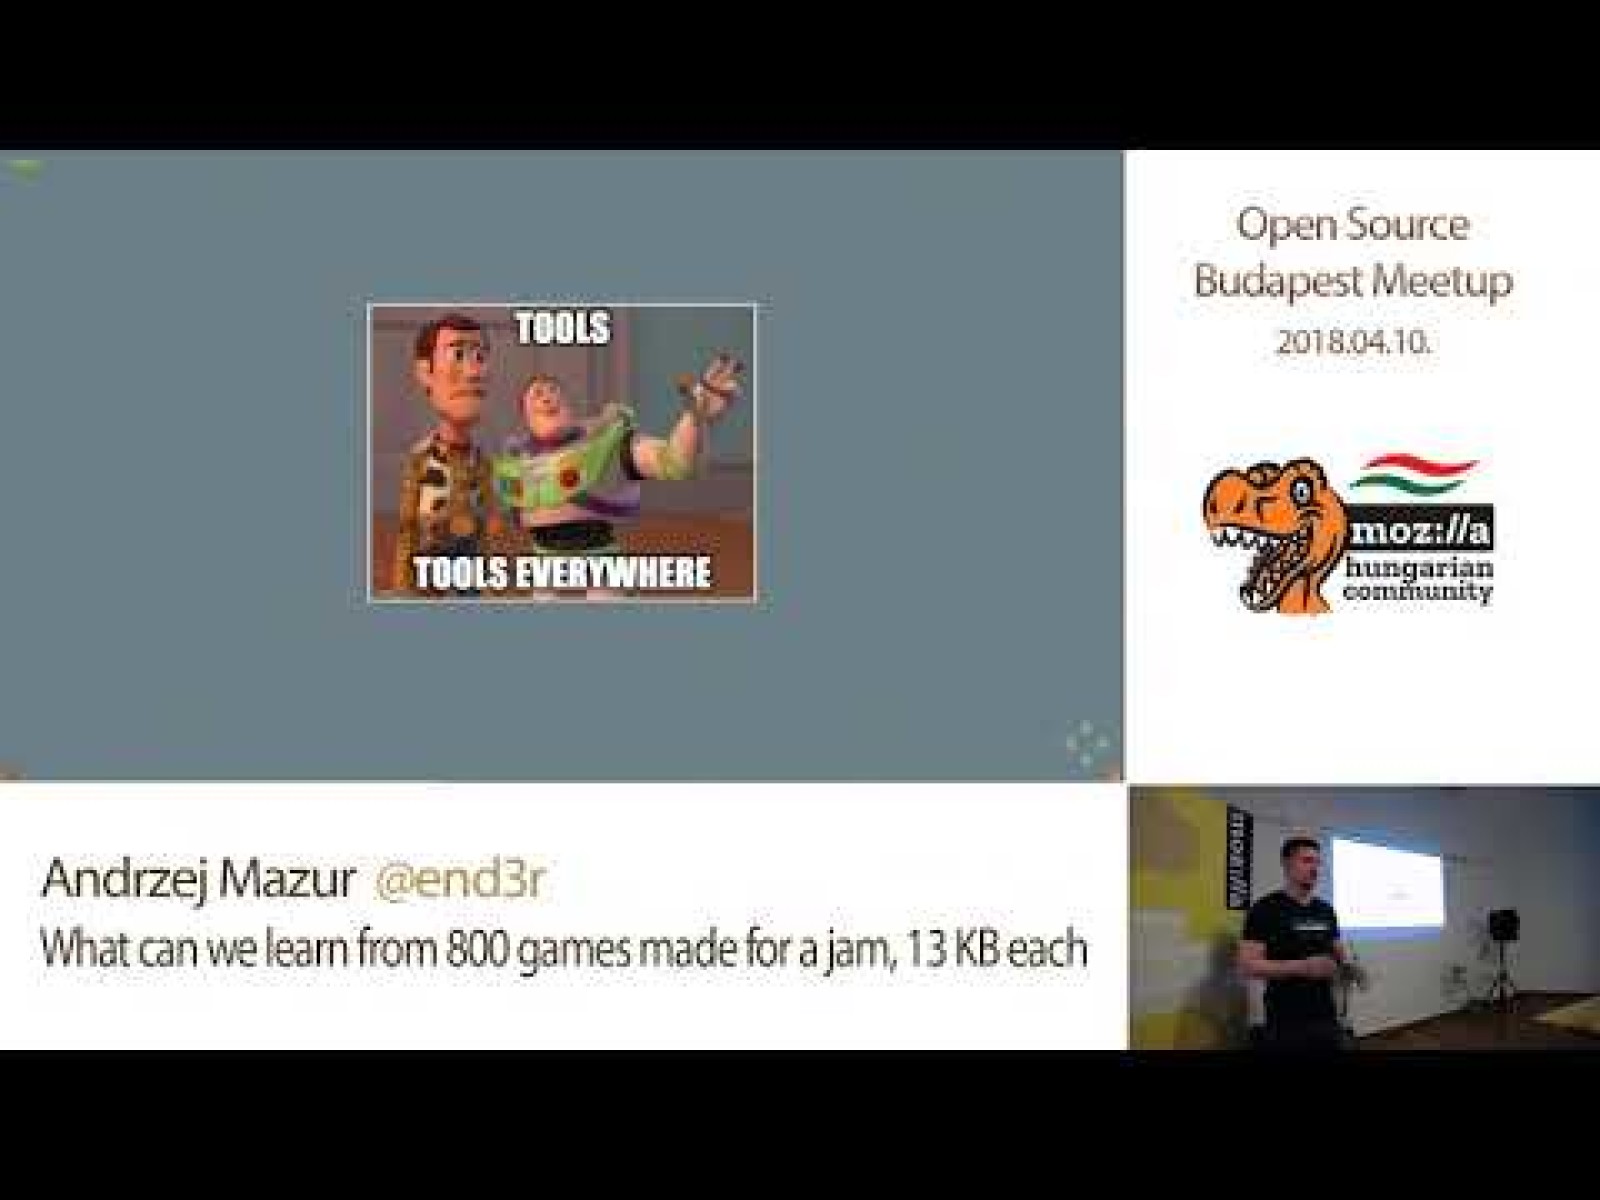 What can we learn from 800 games made for a jam, 13 kb each